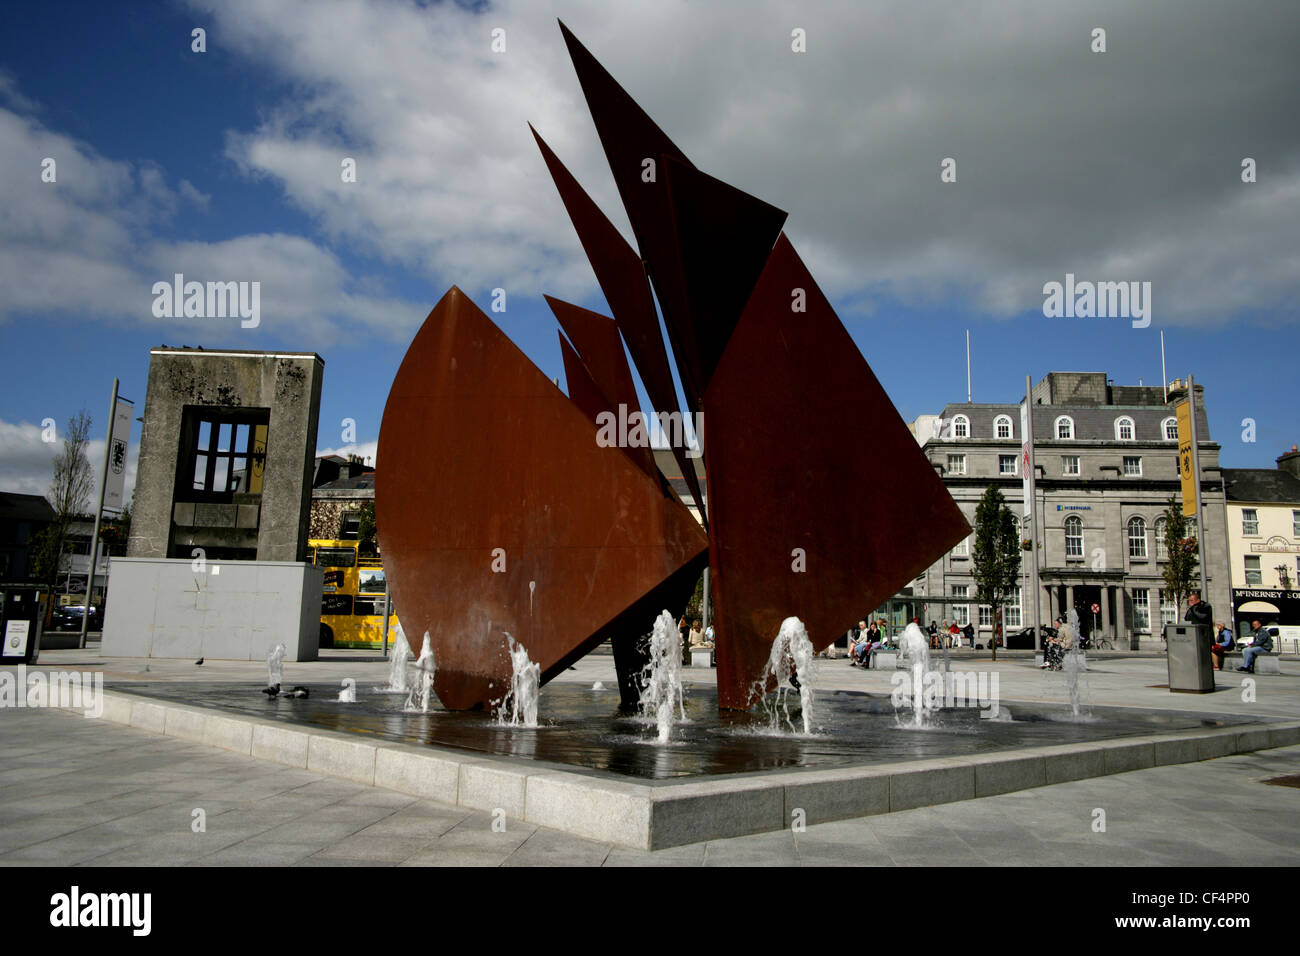 The Fountain in Eyre Square; built in 1984, consists of a copper-coloured representation of the sails of the Galway Hooker. This Stock Photo